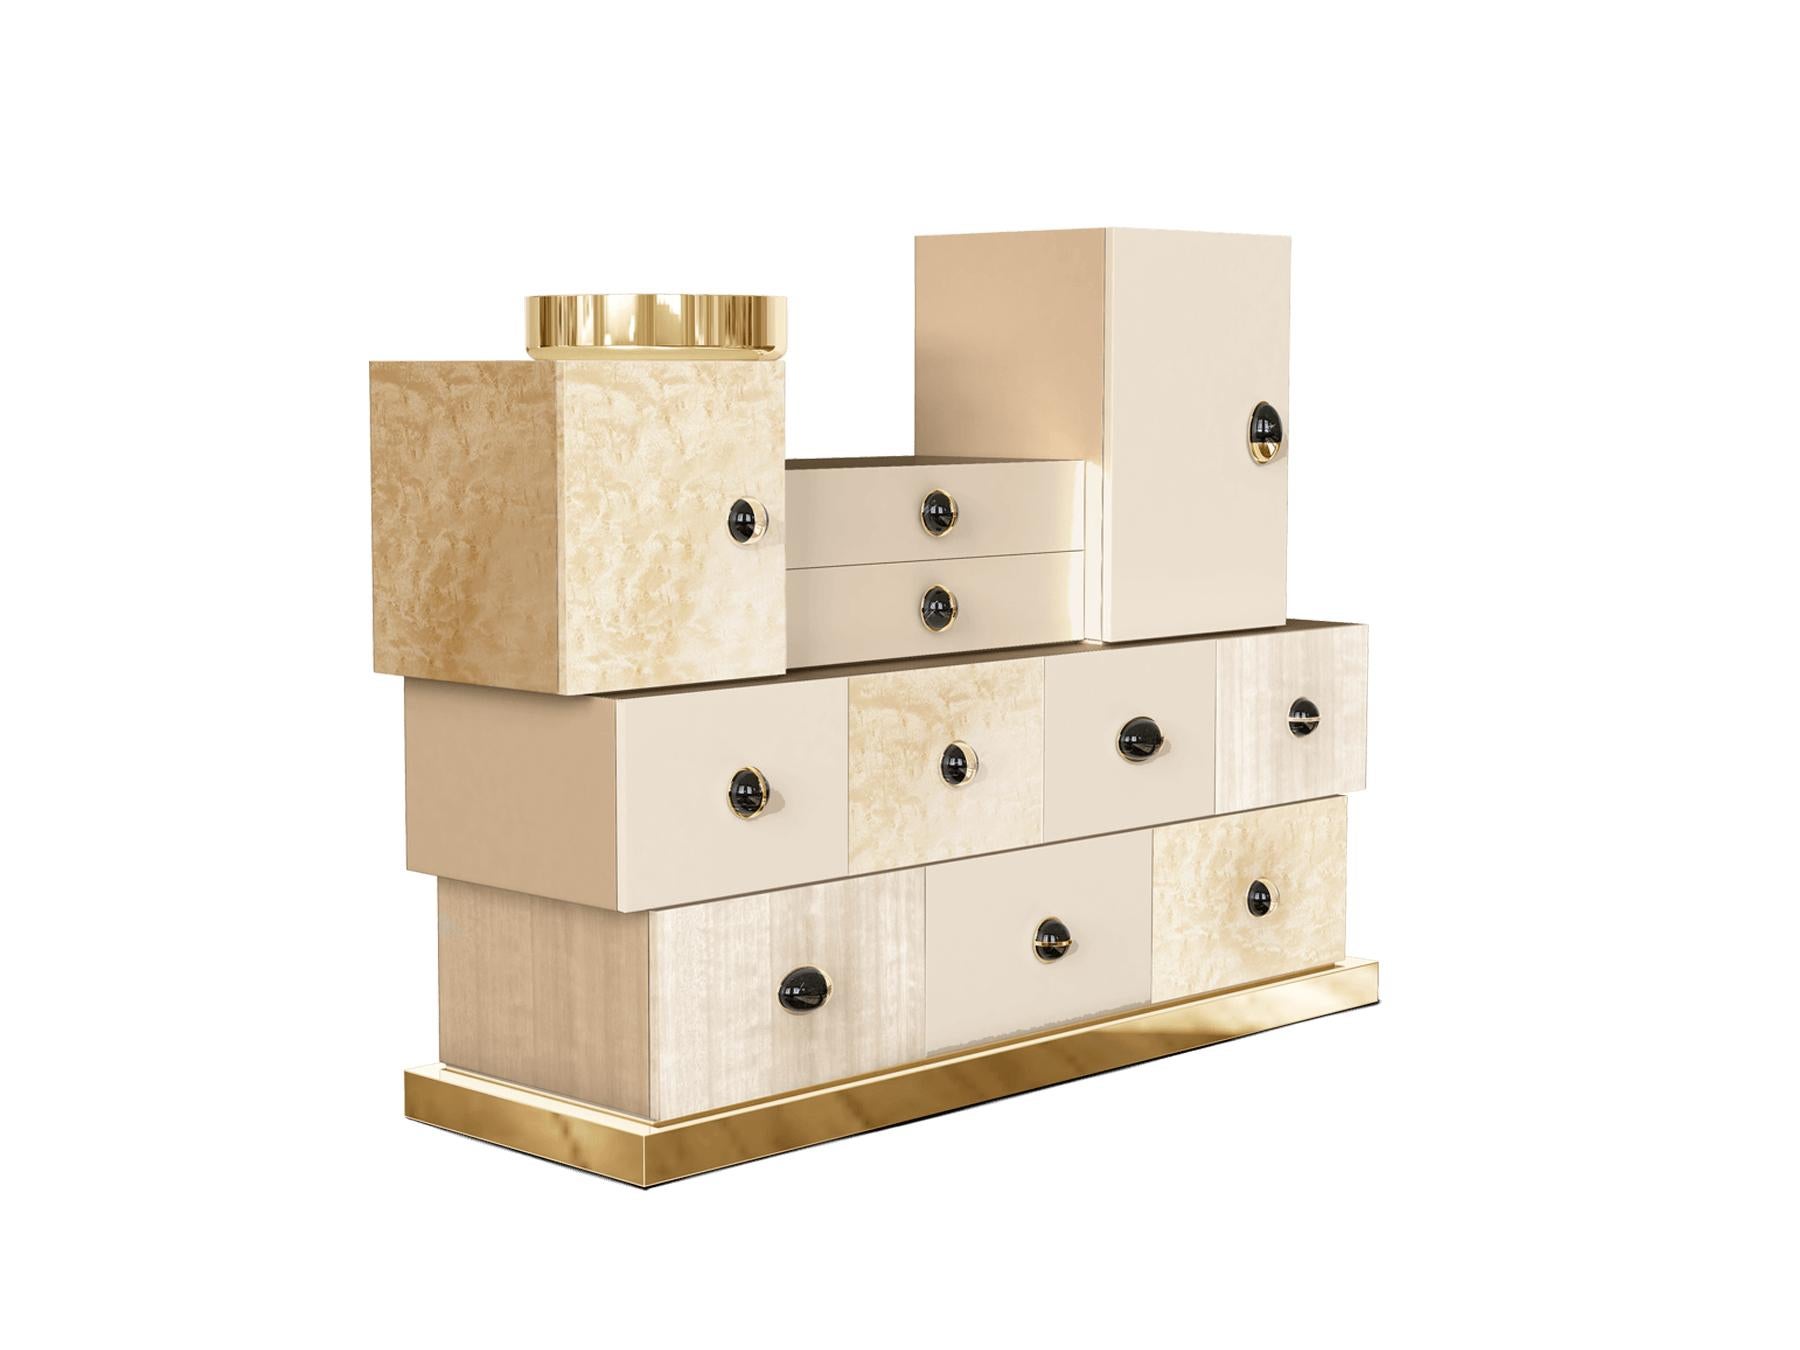 The Matrioska Chest of Drawers is a visual wonder — from its exquisite workmanship to its bold impact. The exceptional design of this modern storage allows it to become a centerpiece in any space it occupies.

Materials: Body in Gloss White Bird Eye